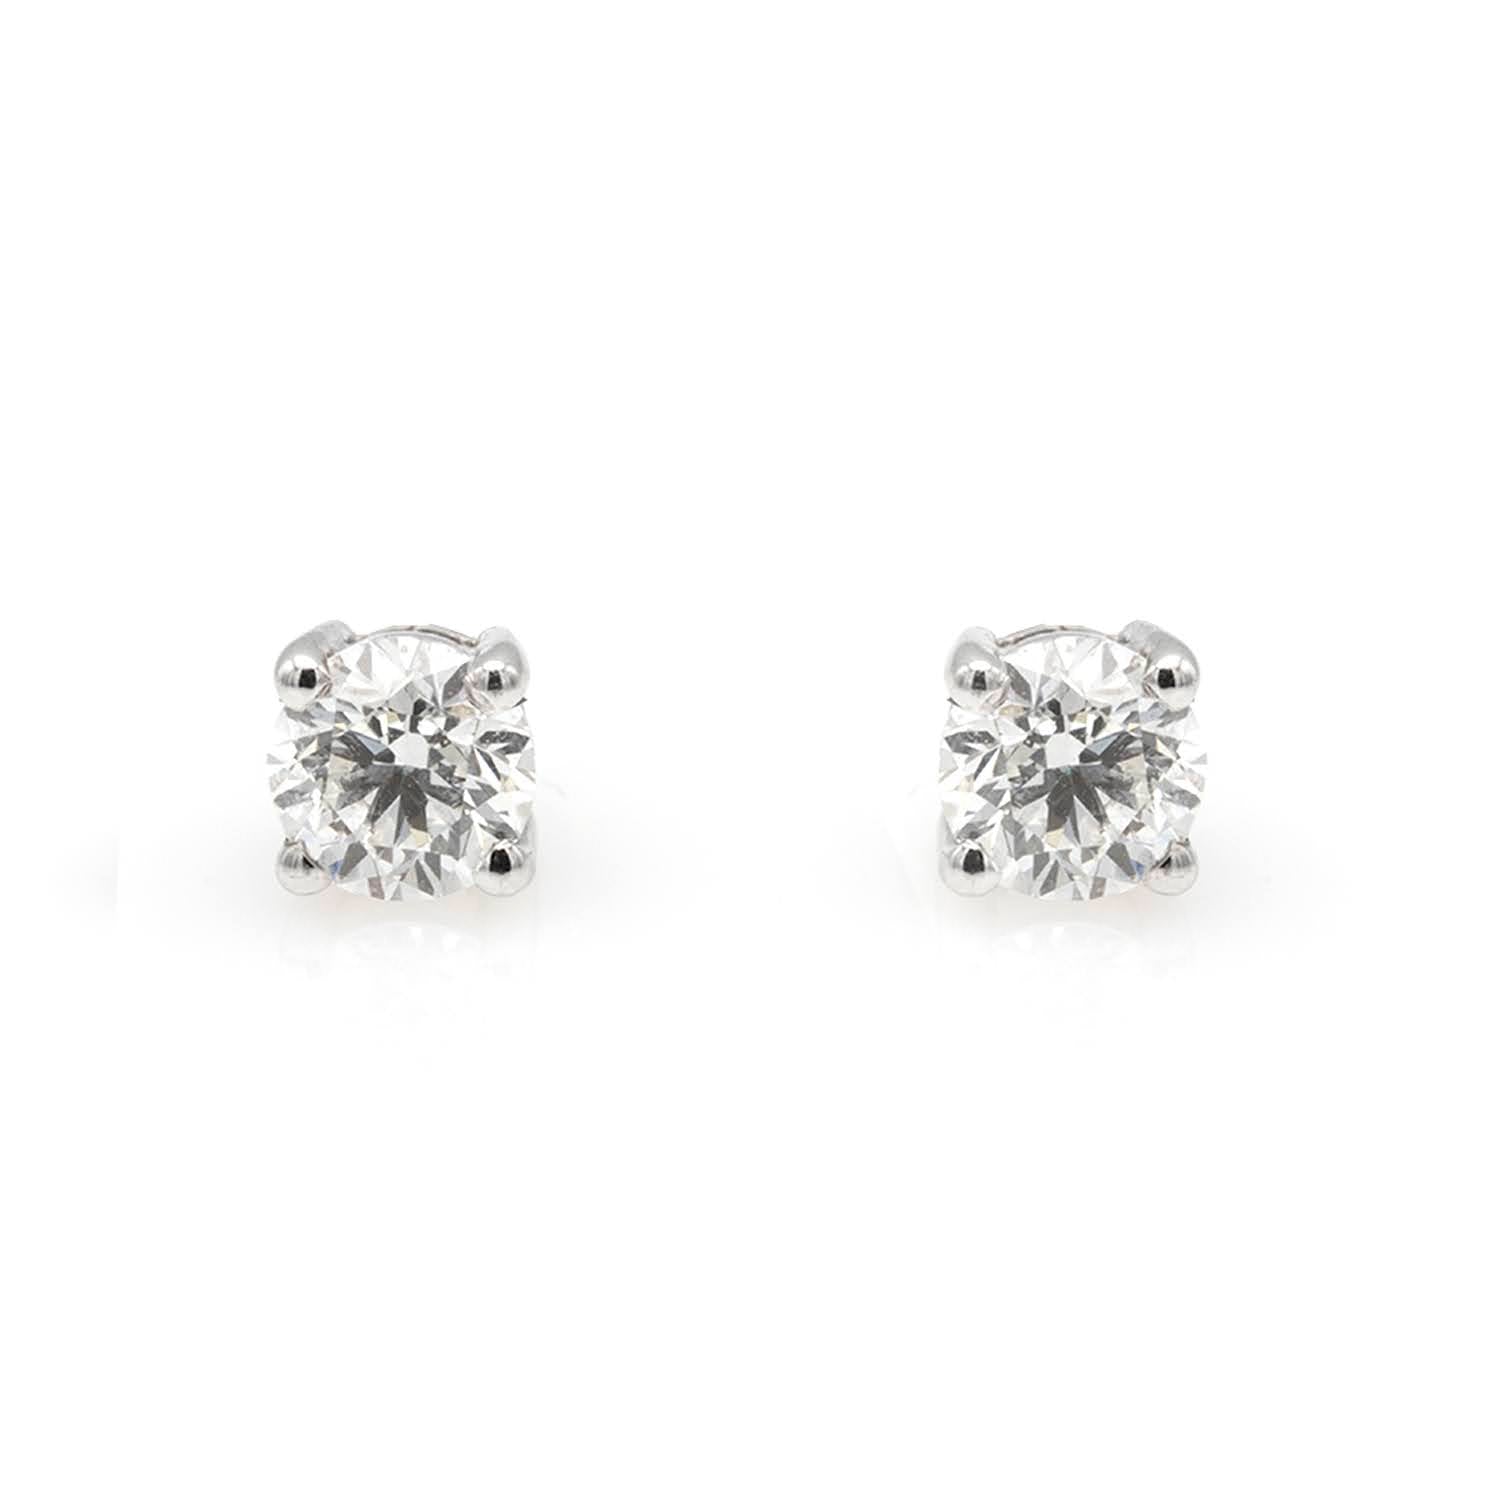 Round Brilliant 1.02ct Diamond 4 Claw Stud Earrings - London Collection